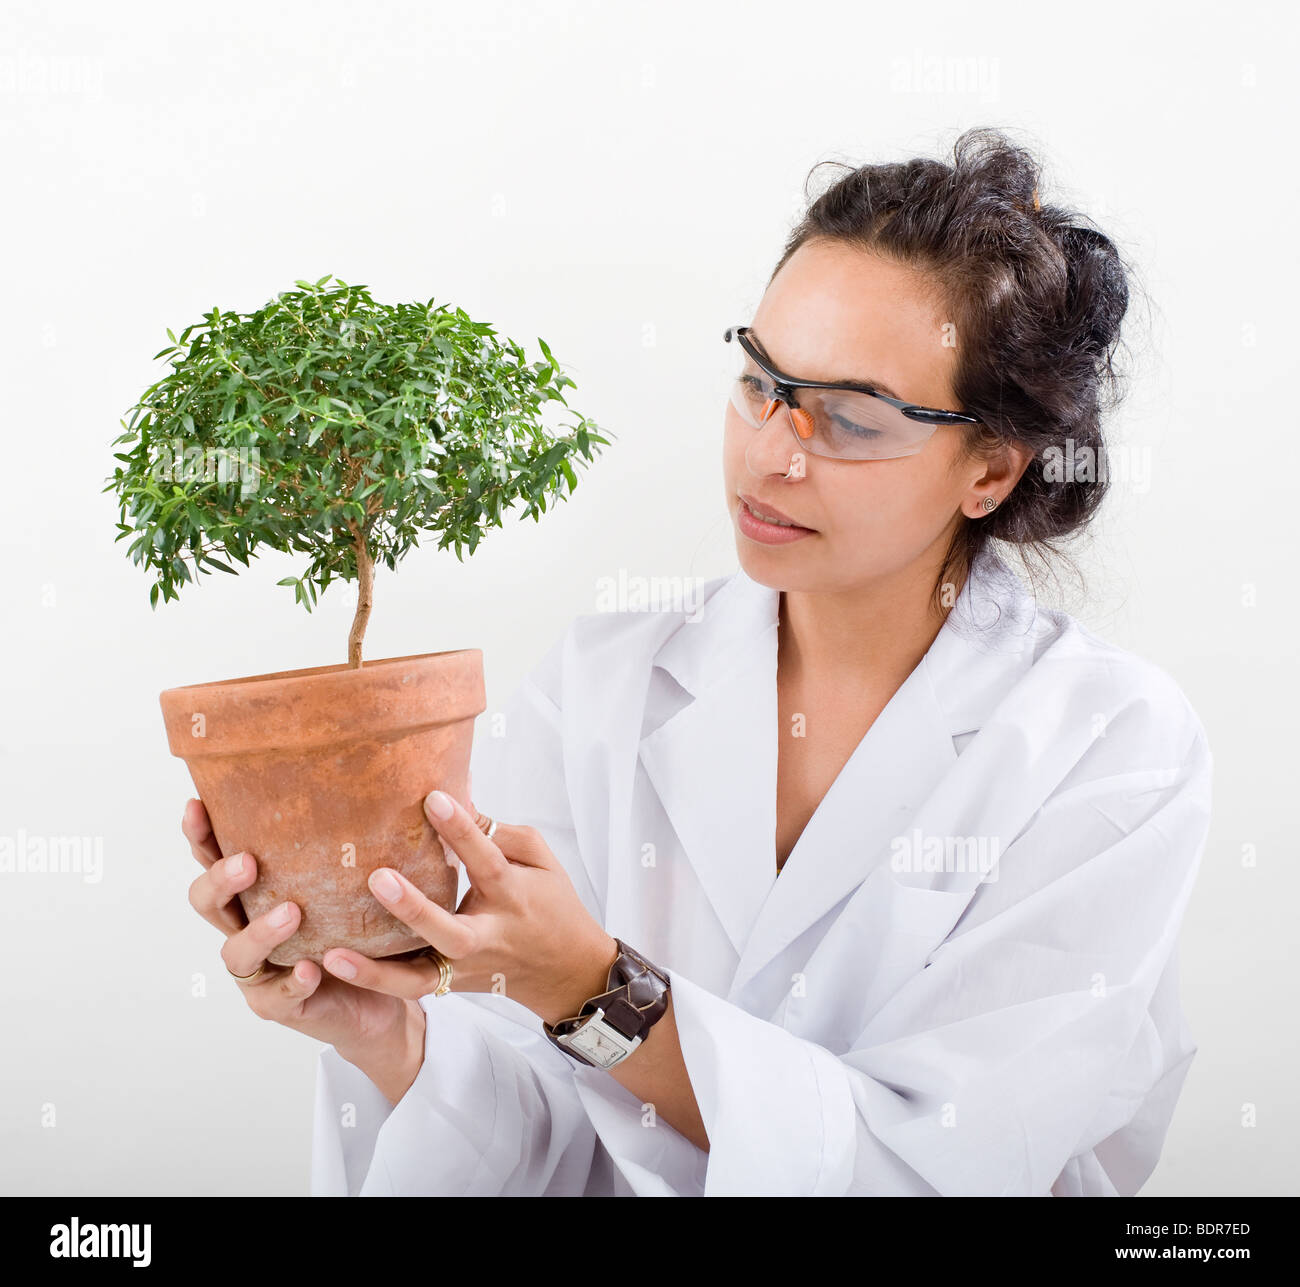 hispanic woman scientist in lab with plant Stock Photo